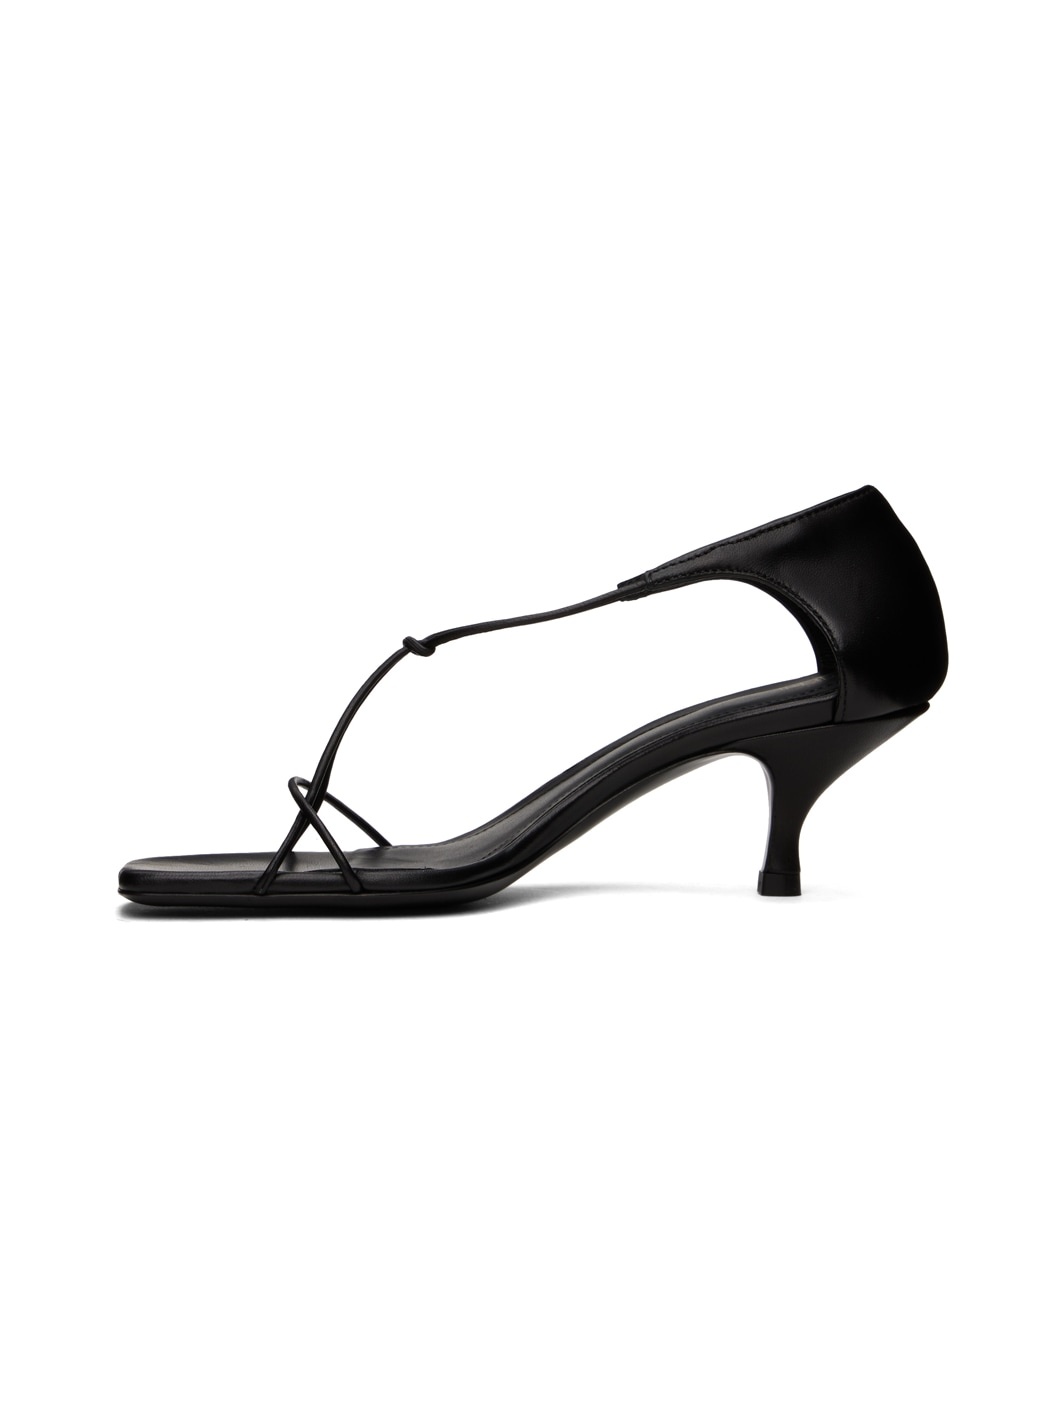 Black 'The Leather Knot' Heeled Sandals - 3